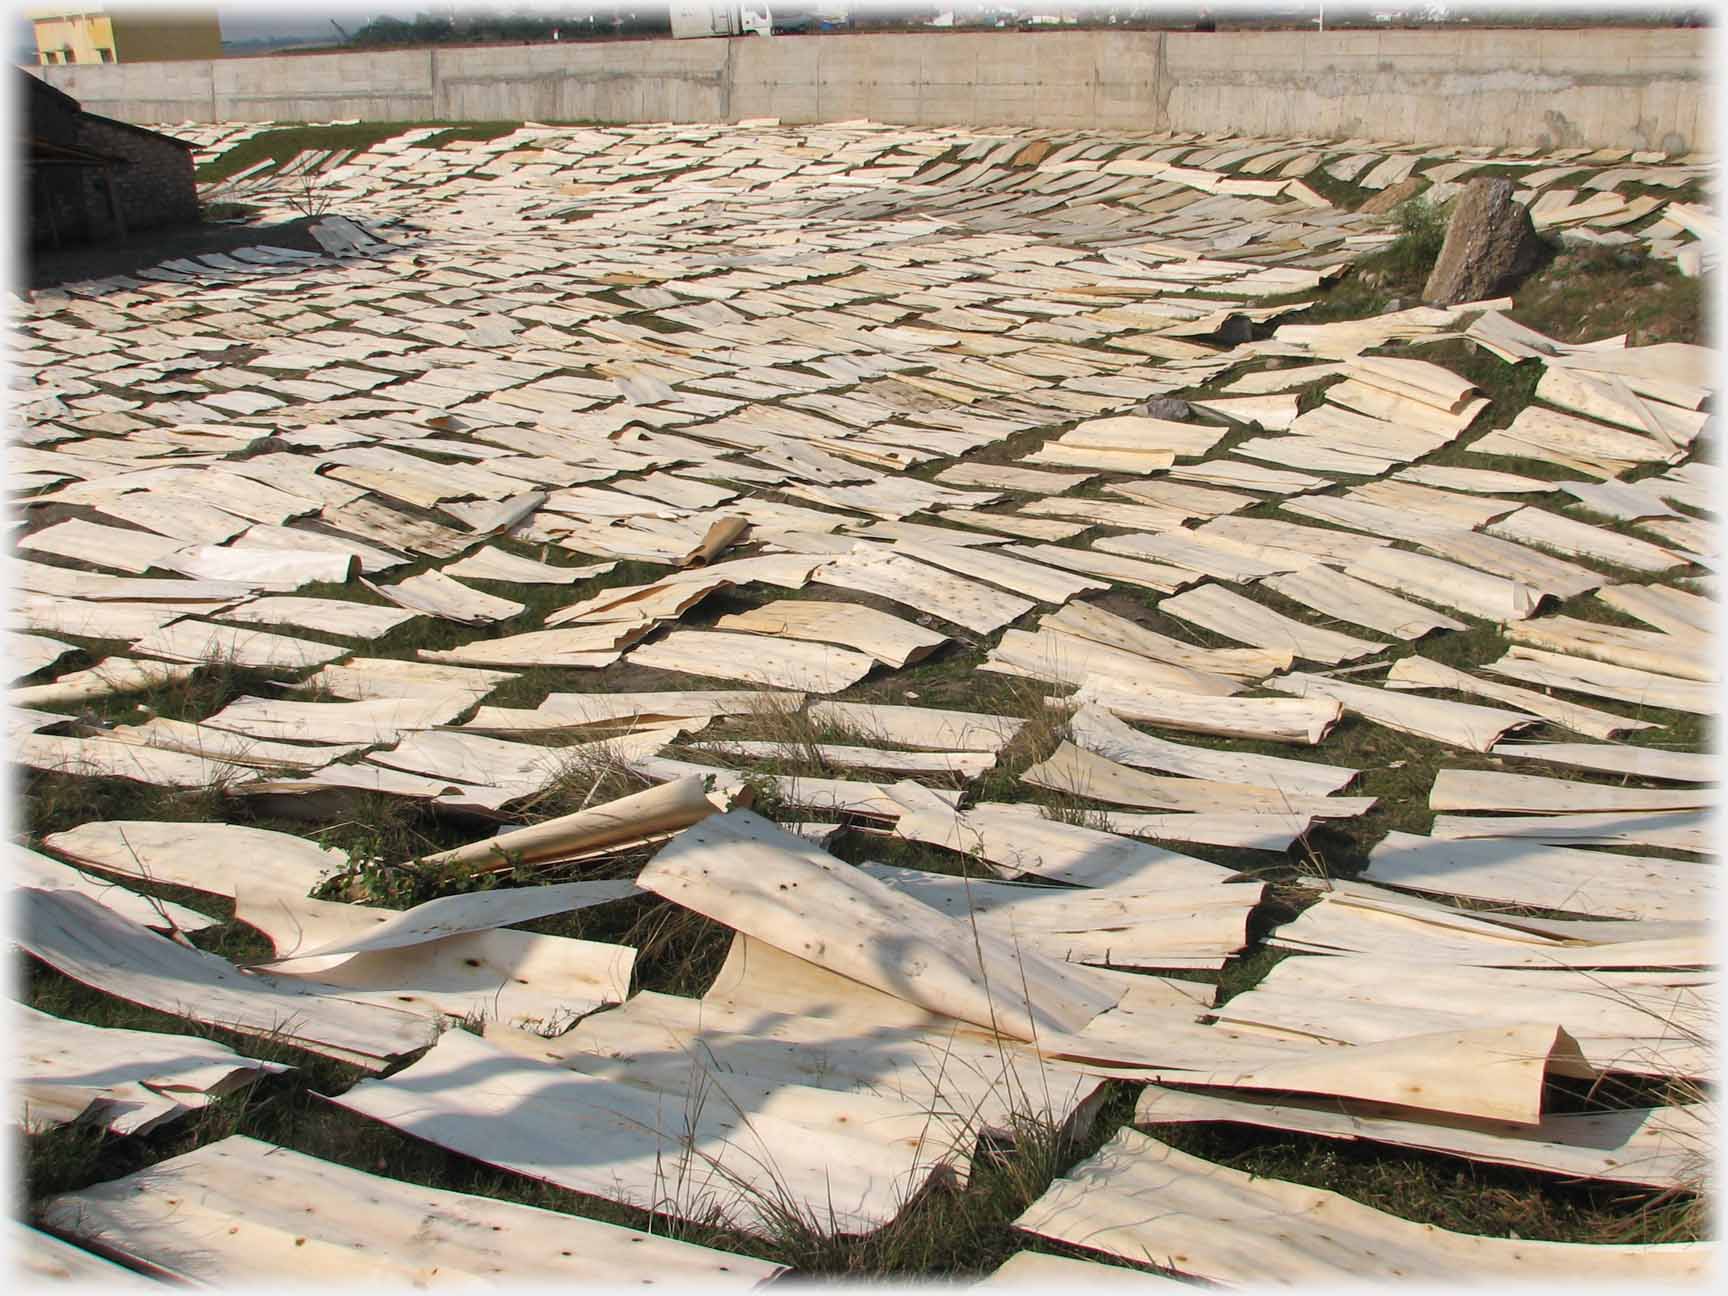 Field covered with sheets of veneer.